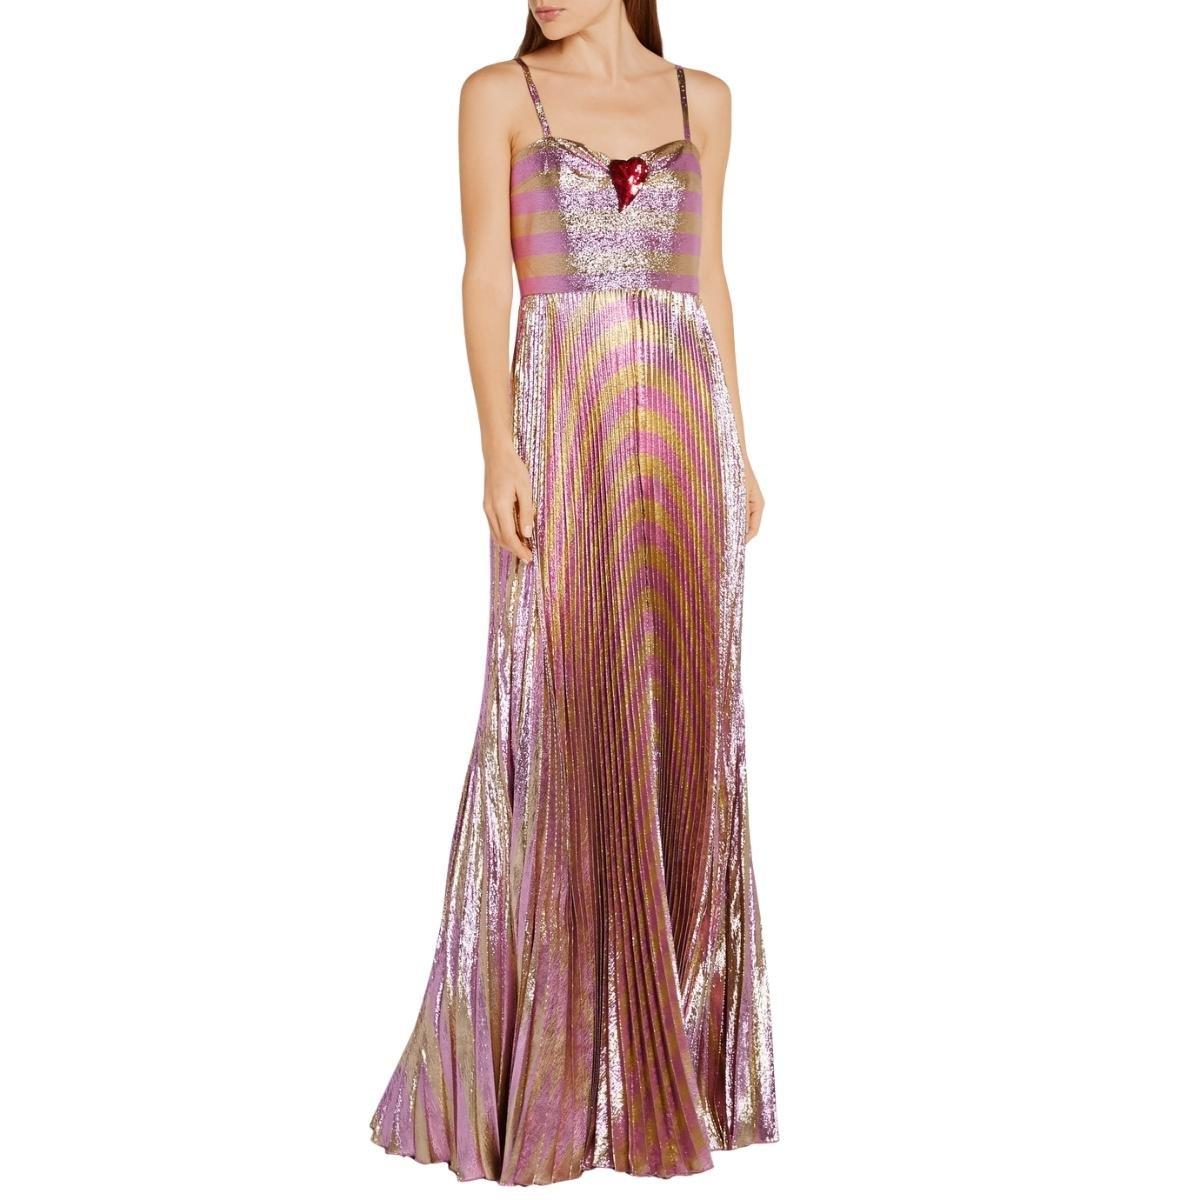 Made from striped lamé with a touch of silk, this gown is embellished with a red sequined heart and finished with a pleated skirt that creates beautiful movement.
Pink and gold lamé
Sleeveless with spaghetti straps and a gathered sweetheart